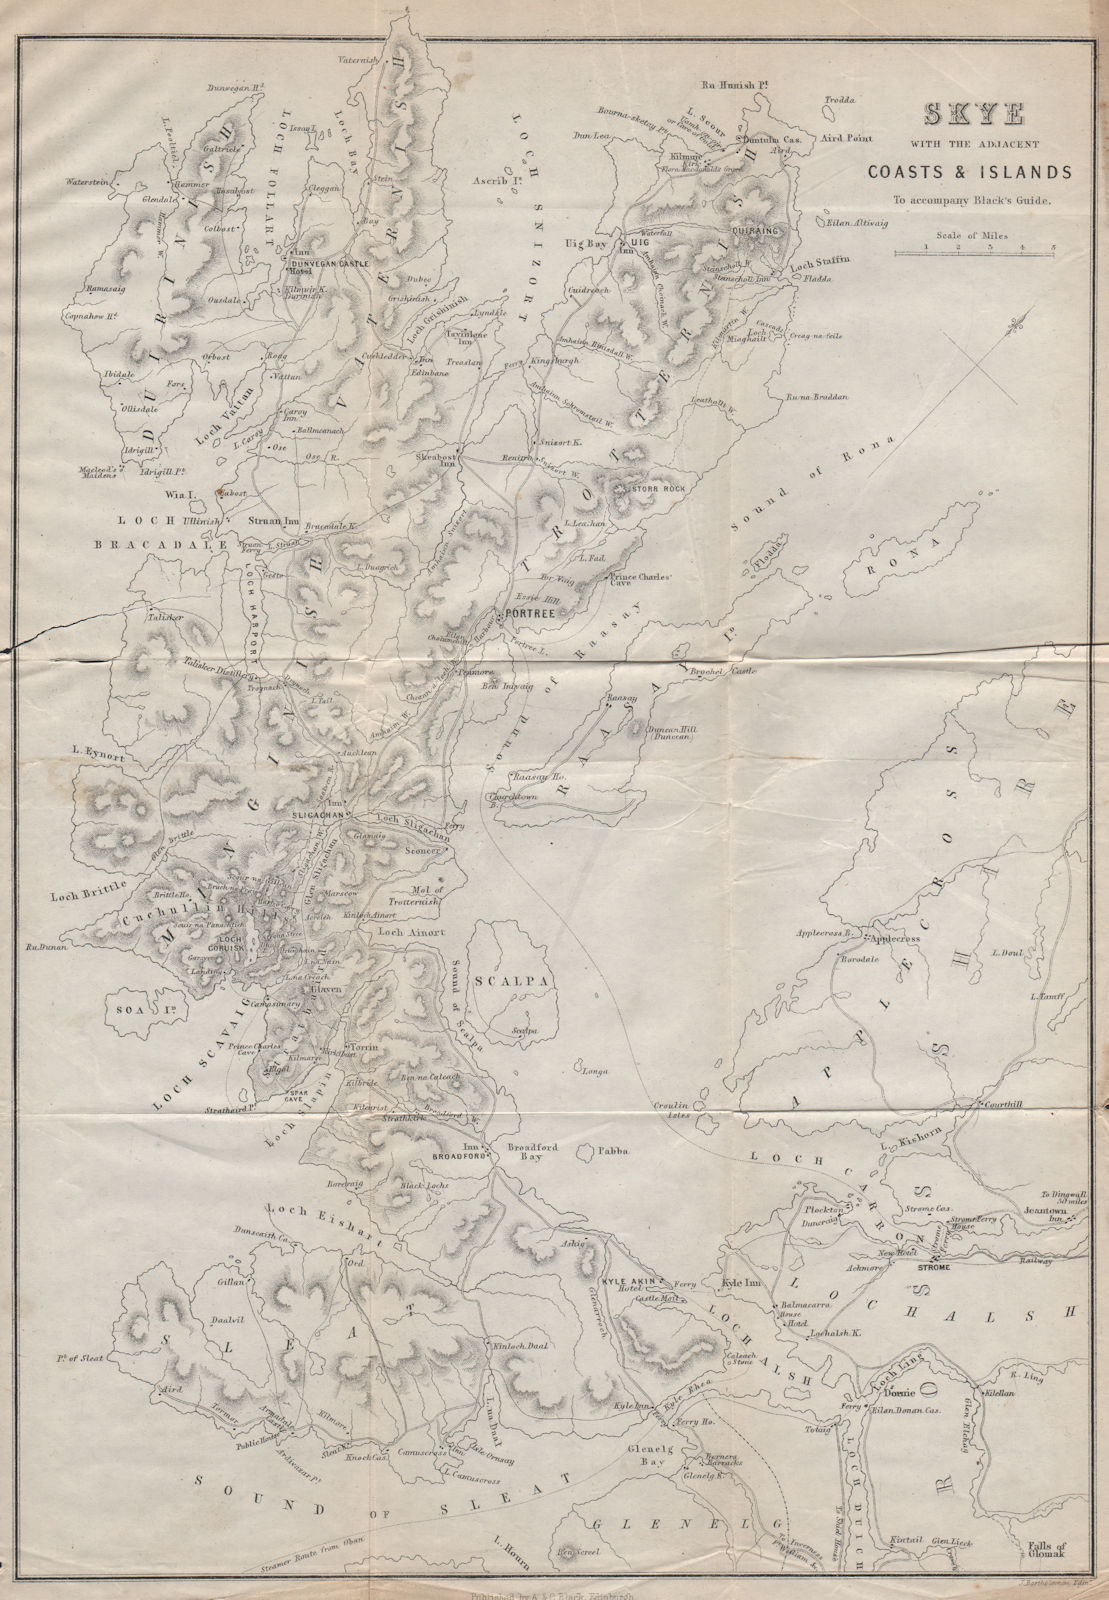 Associate Product Skye with the adjacent coasts & islands. Ross shire. Scotland 1886 old map